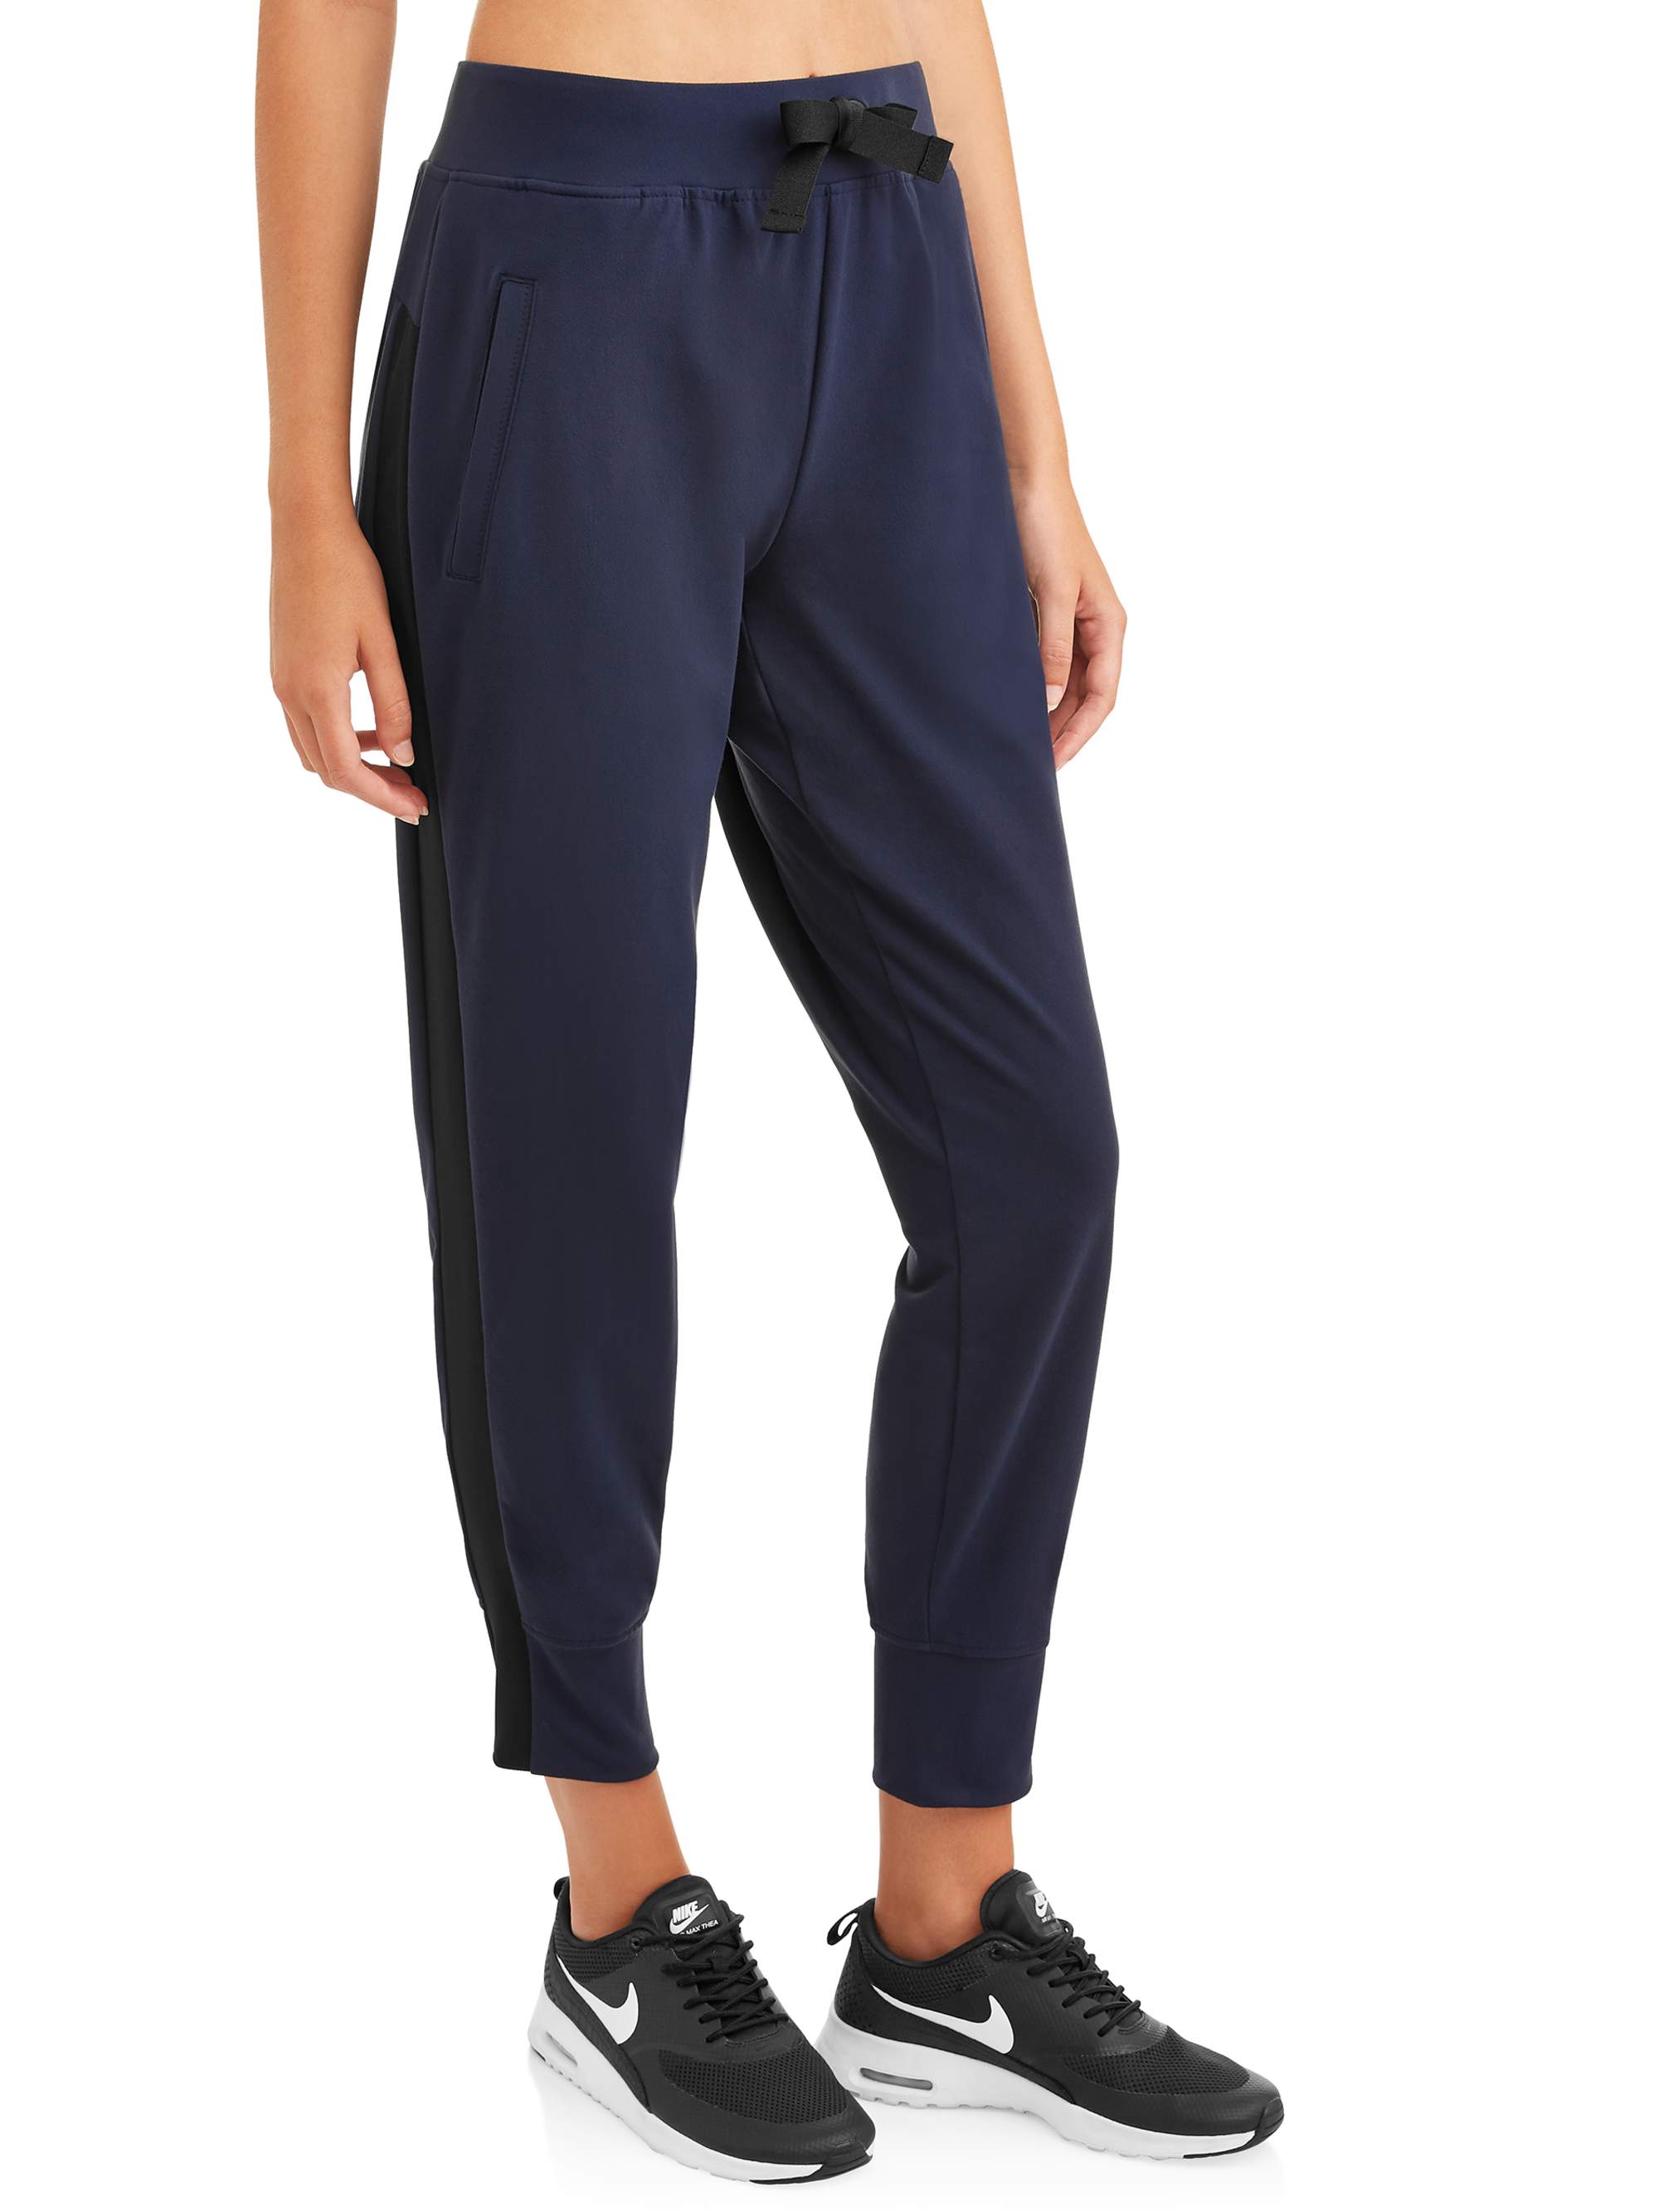 Avia Women's Athleisure Jogger Crop With Side Stripe - image 1 of 4